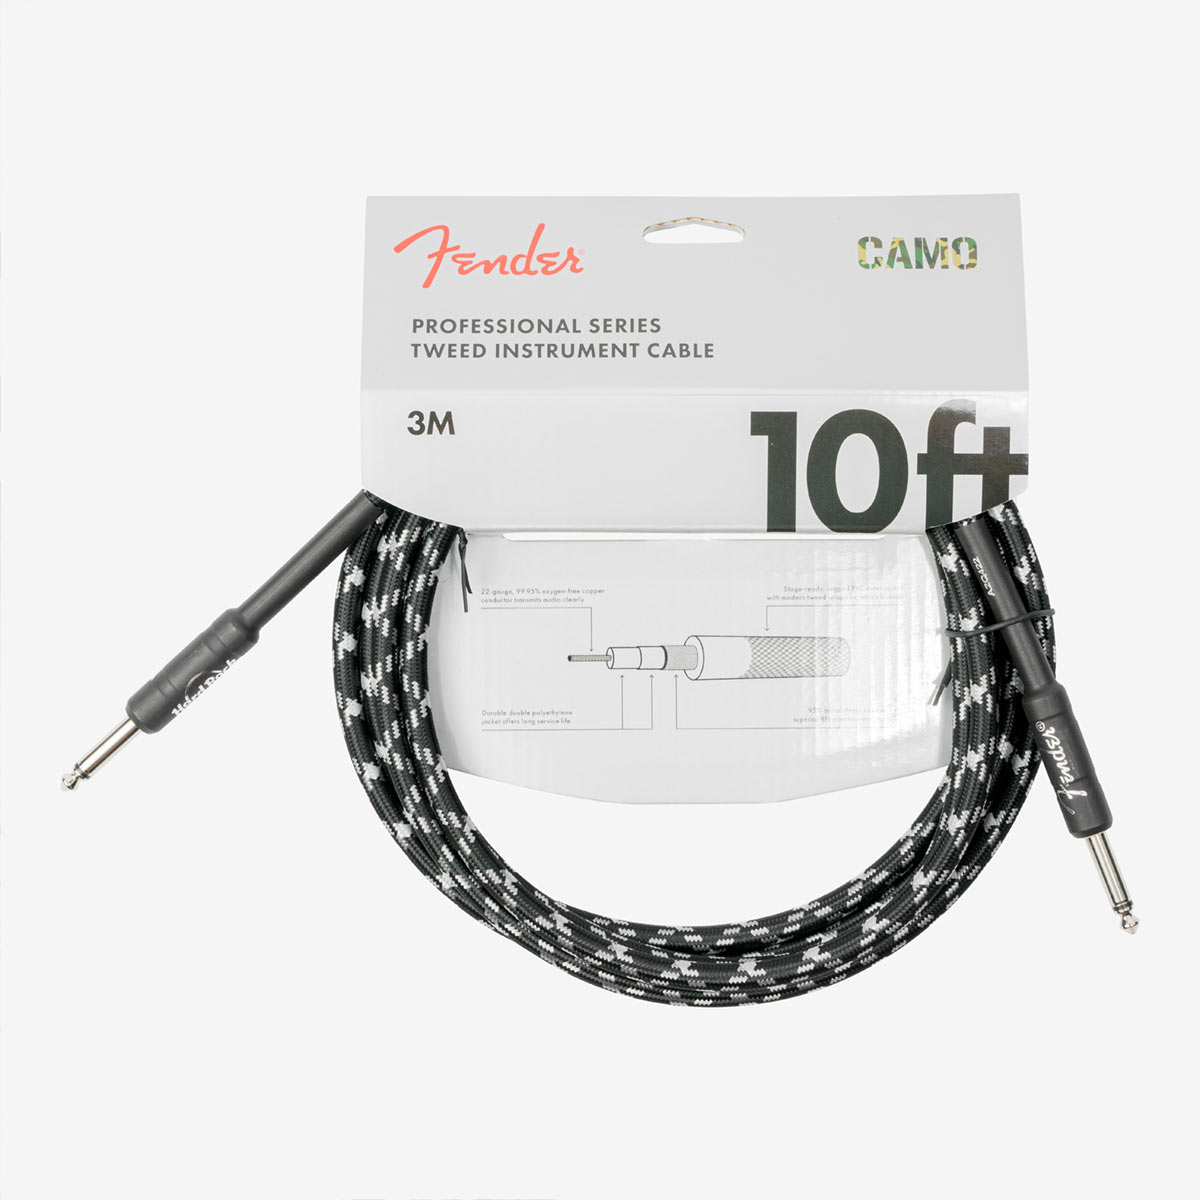 Fender x Hard Rock Instrument Cable 10 Inch in Black Tweed and Camo image number 1